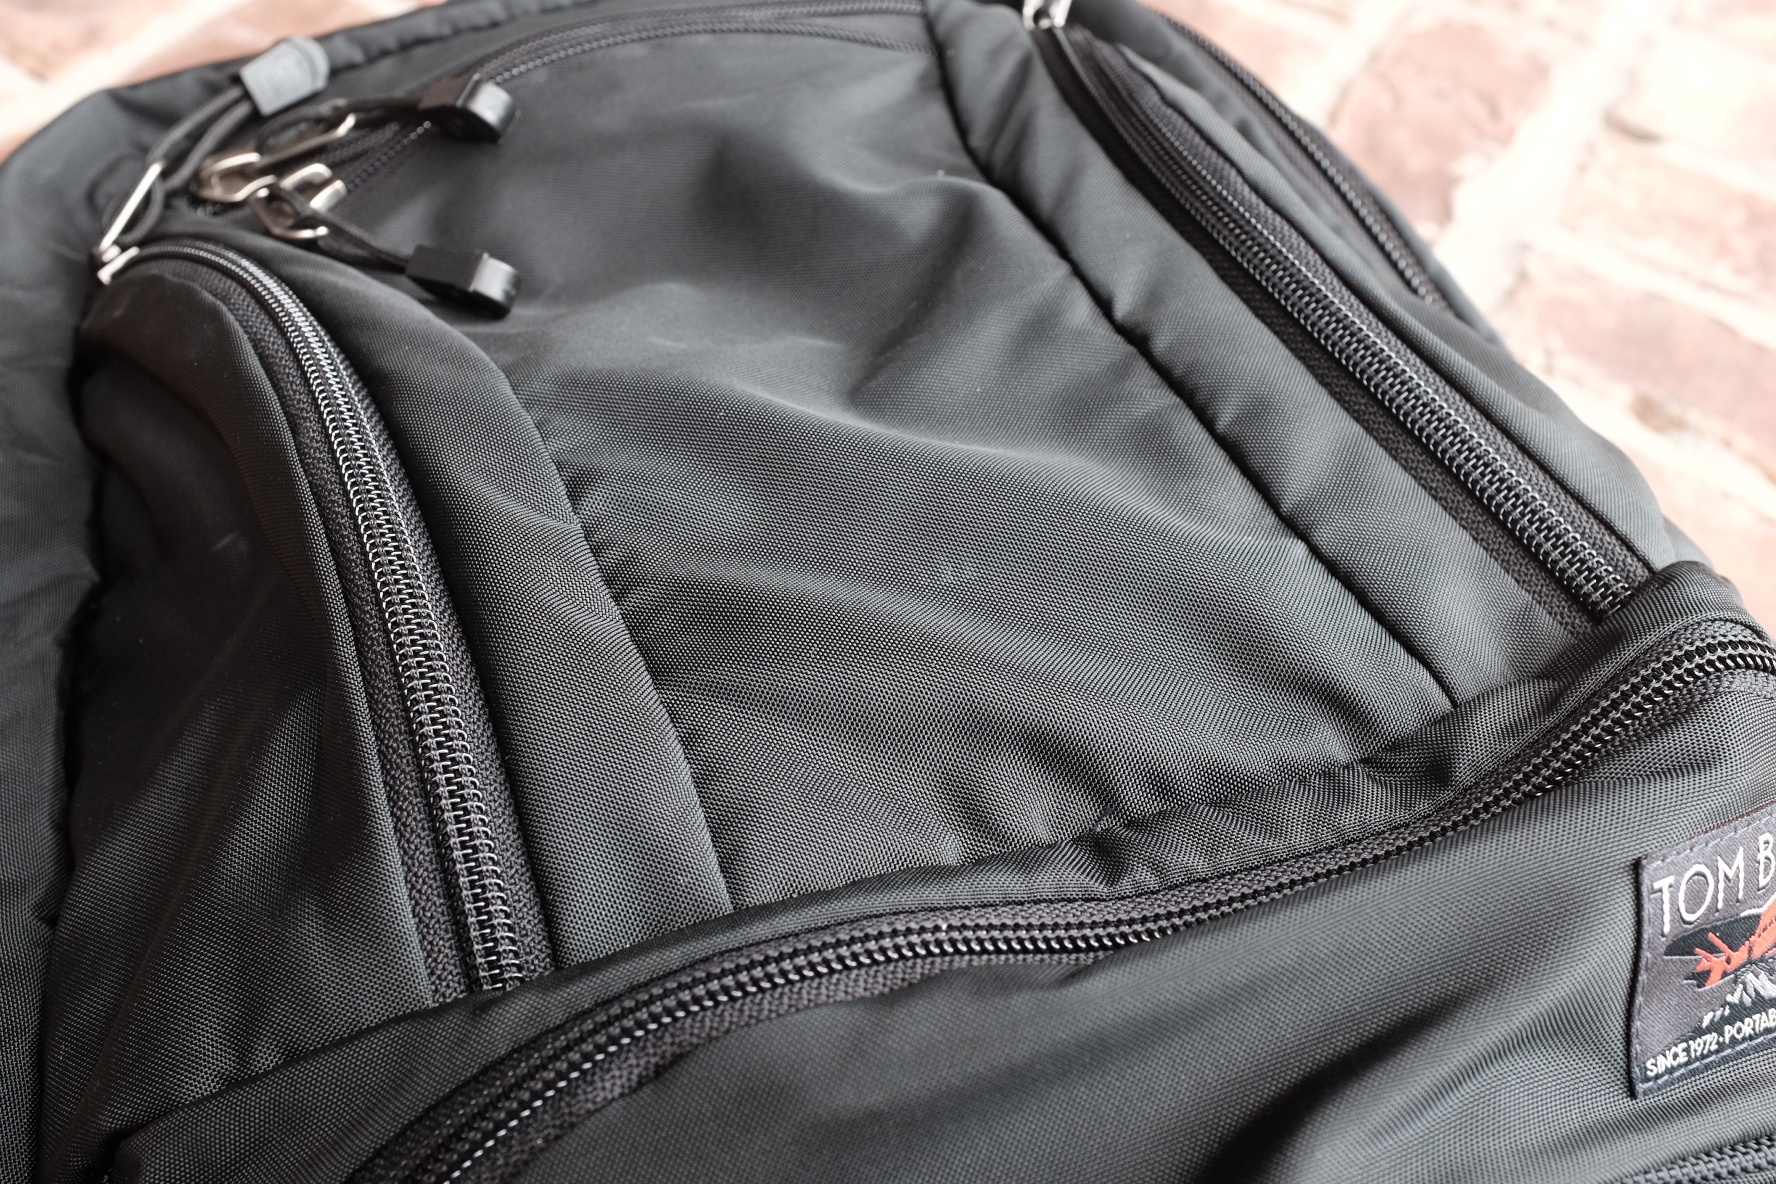 Tom Bihn’s New Synik 22 and 30 – The Brooks Review